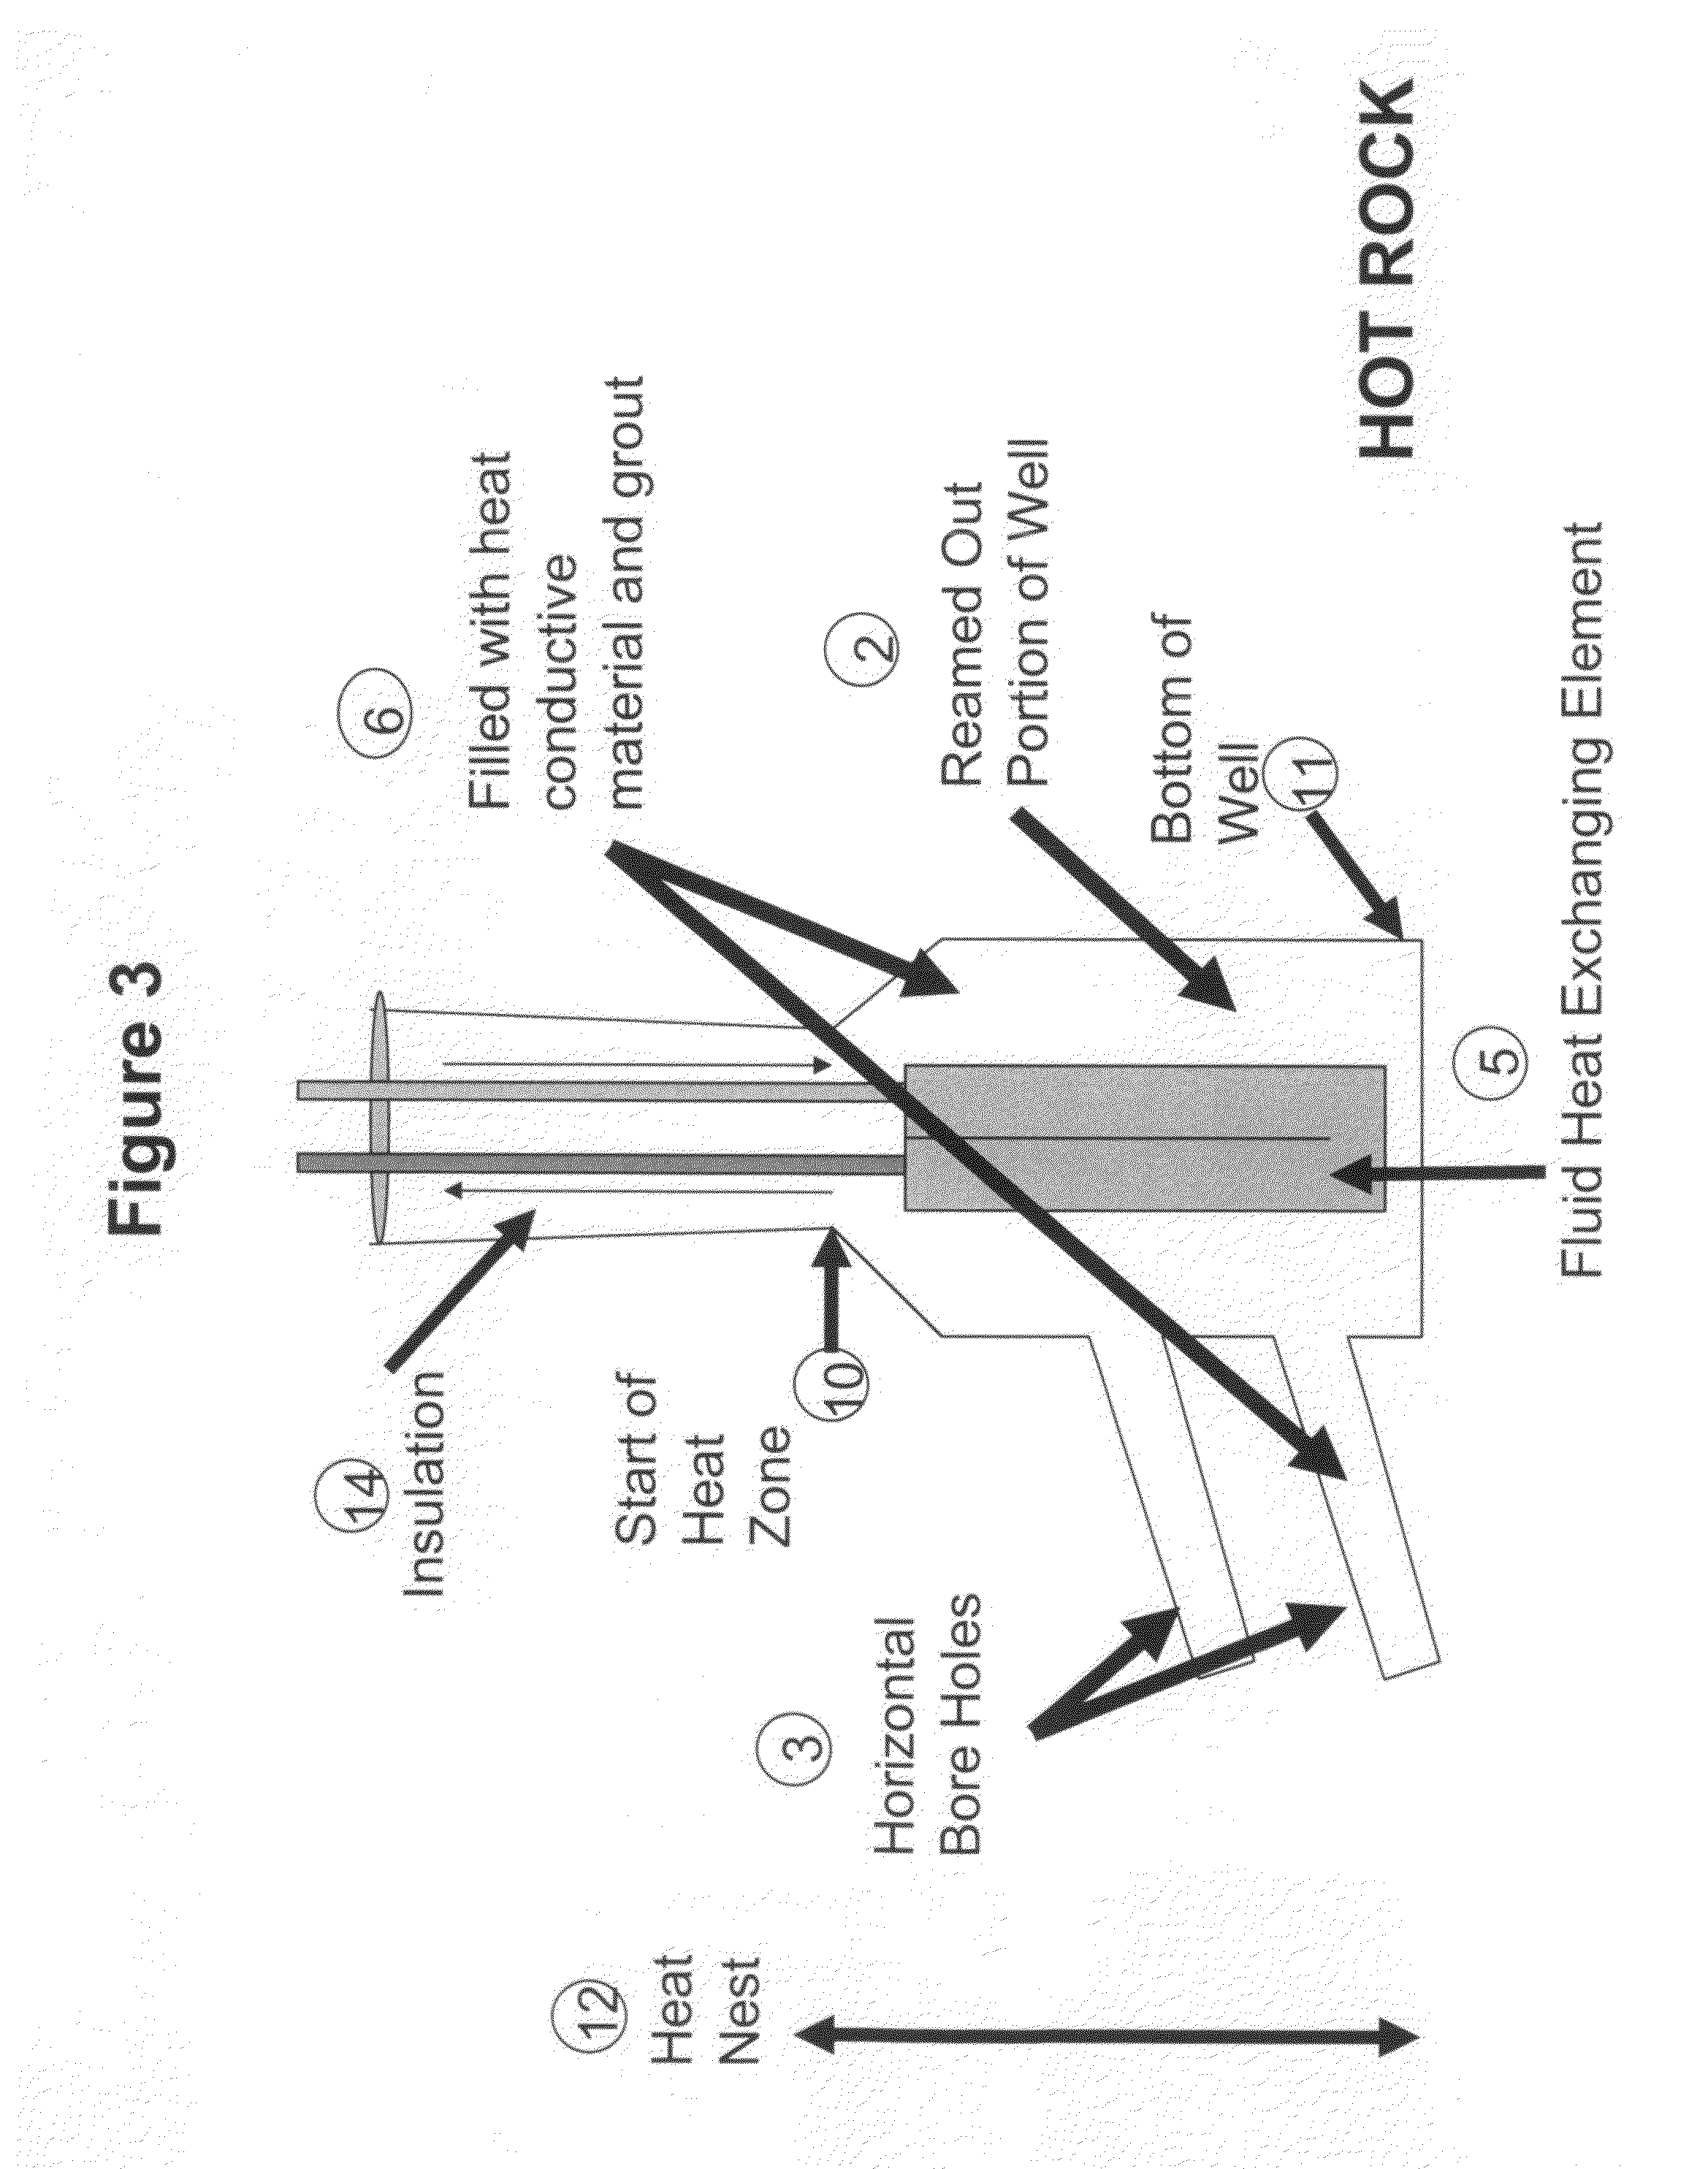 System and method of maximizing heat transfer at the bottom of a well using heat conductive components and a predictive model